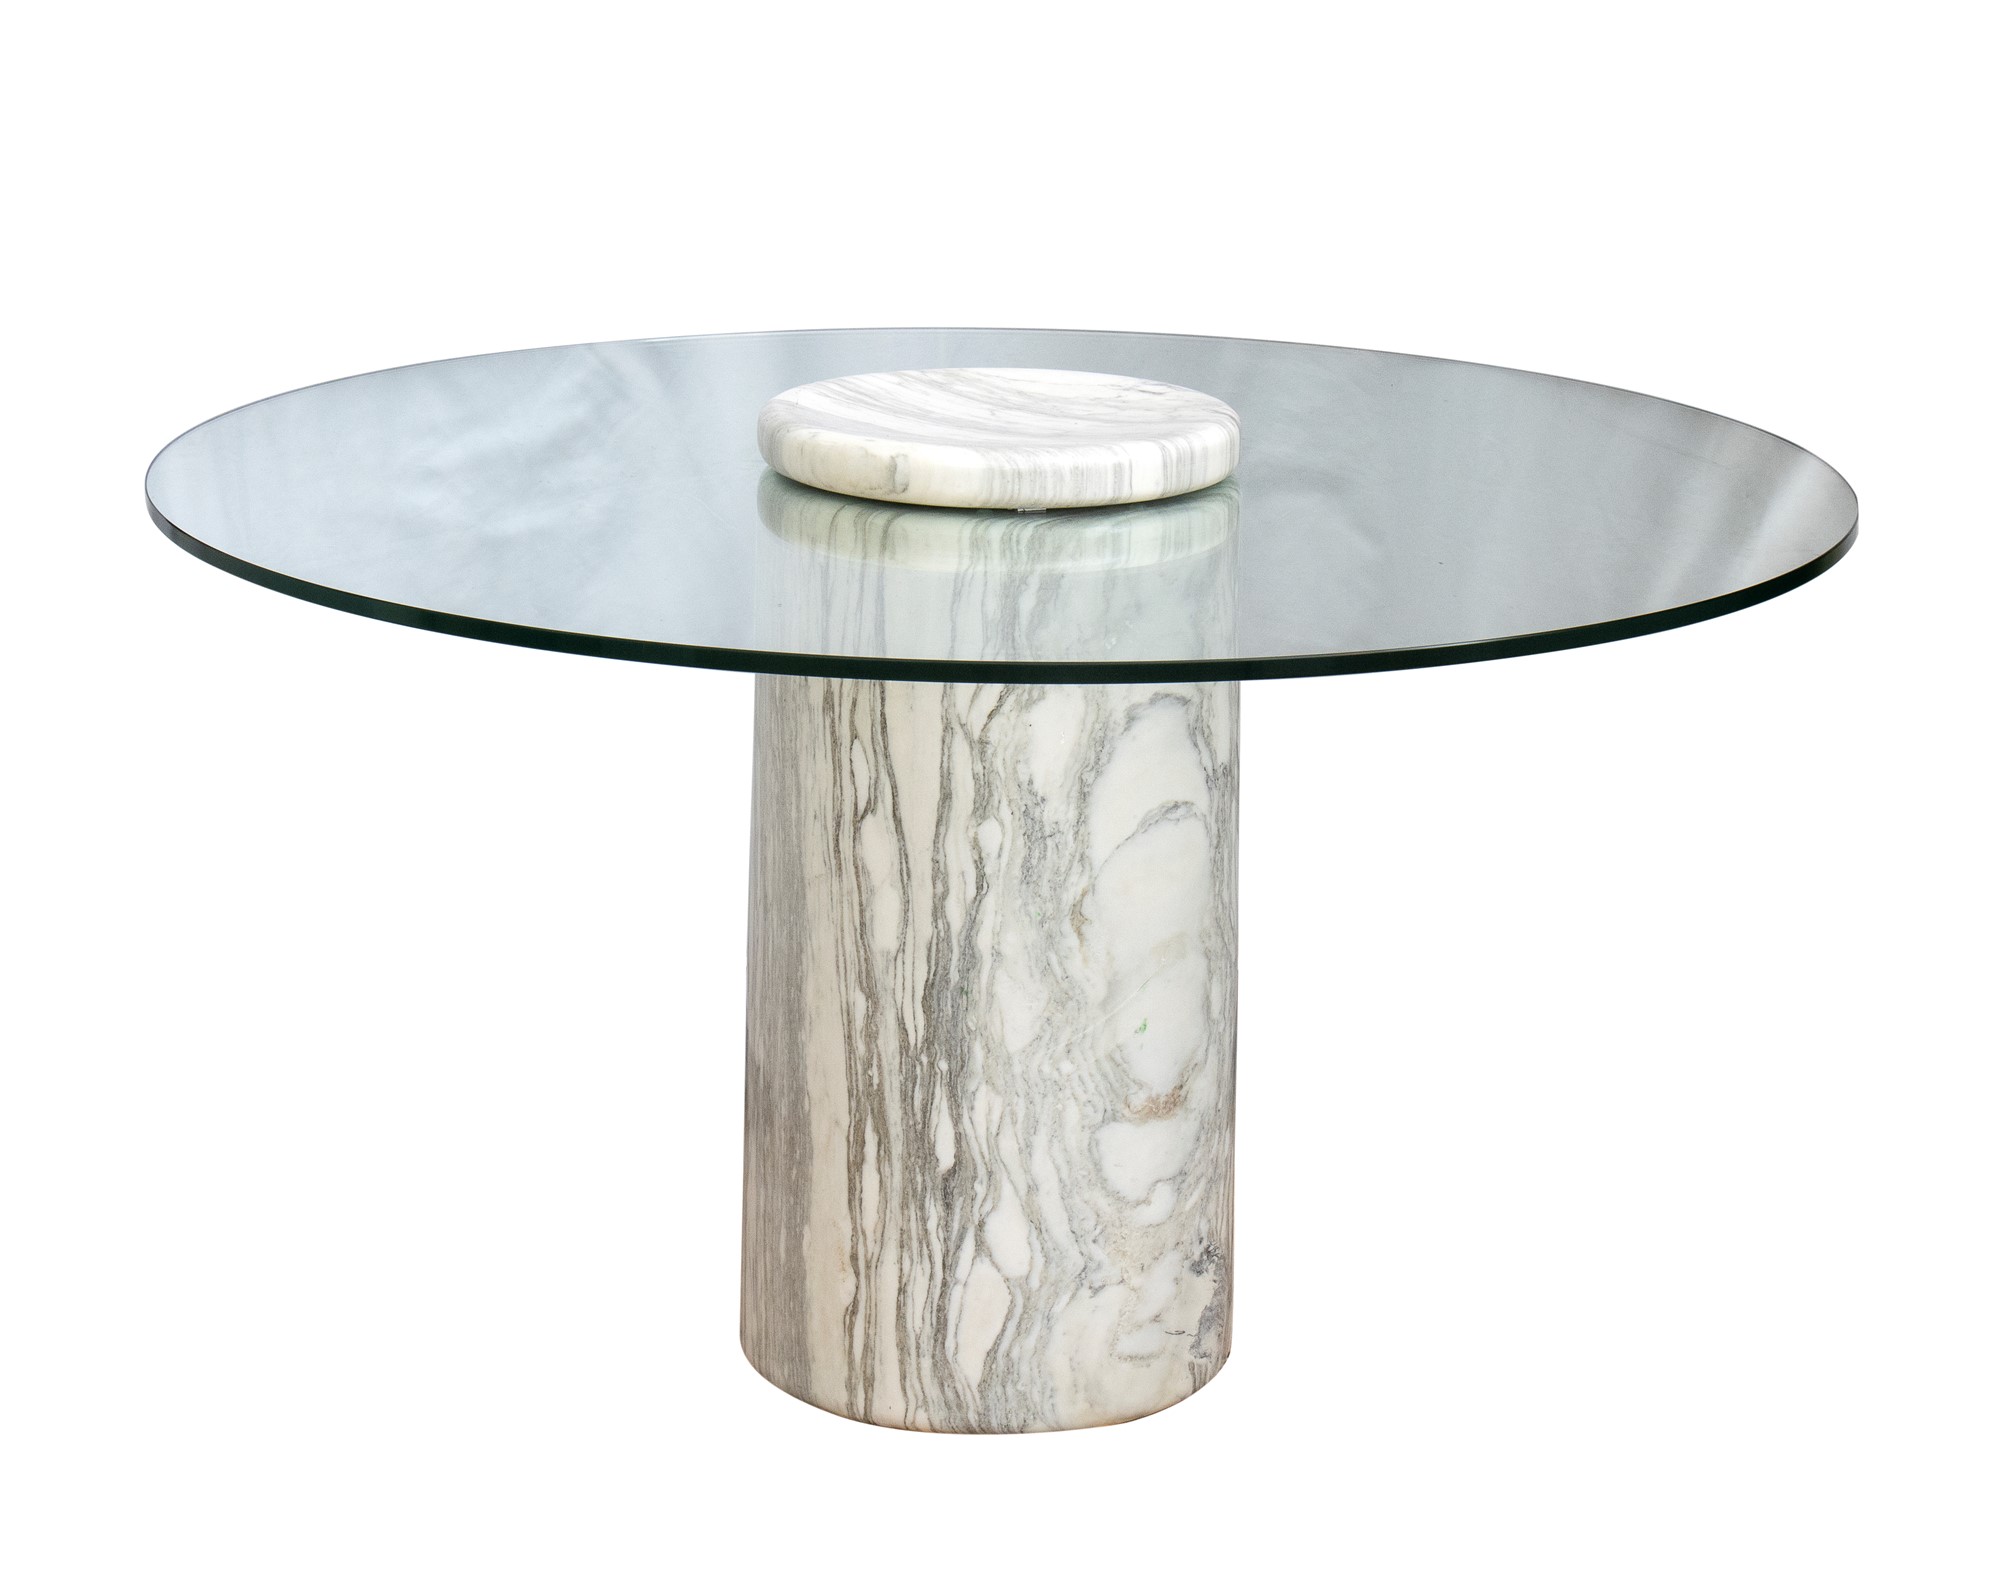 Angelo Mangiarotti Castore table in white marble and glass top - Image 2 of 7